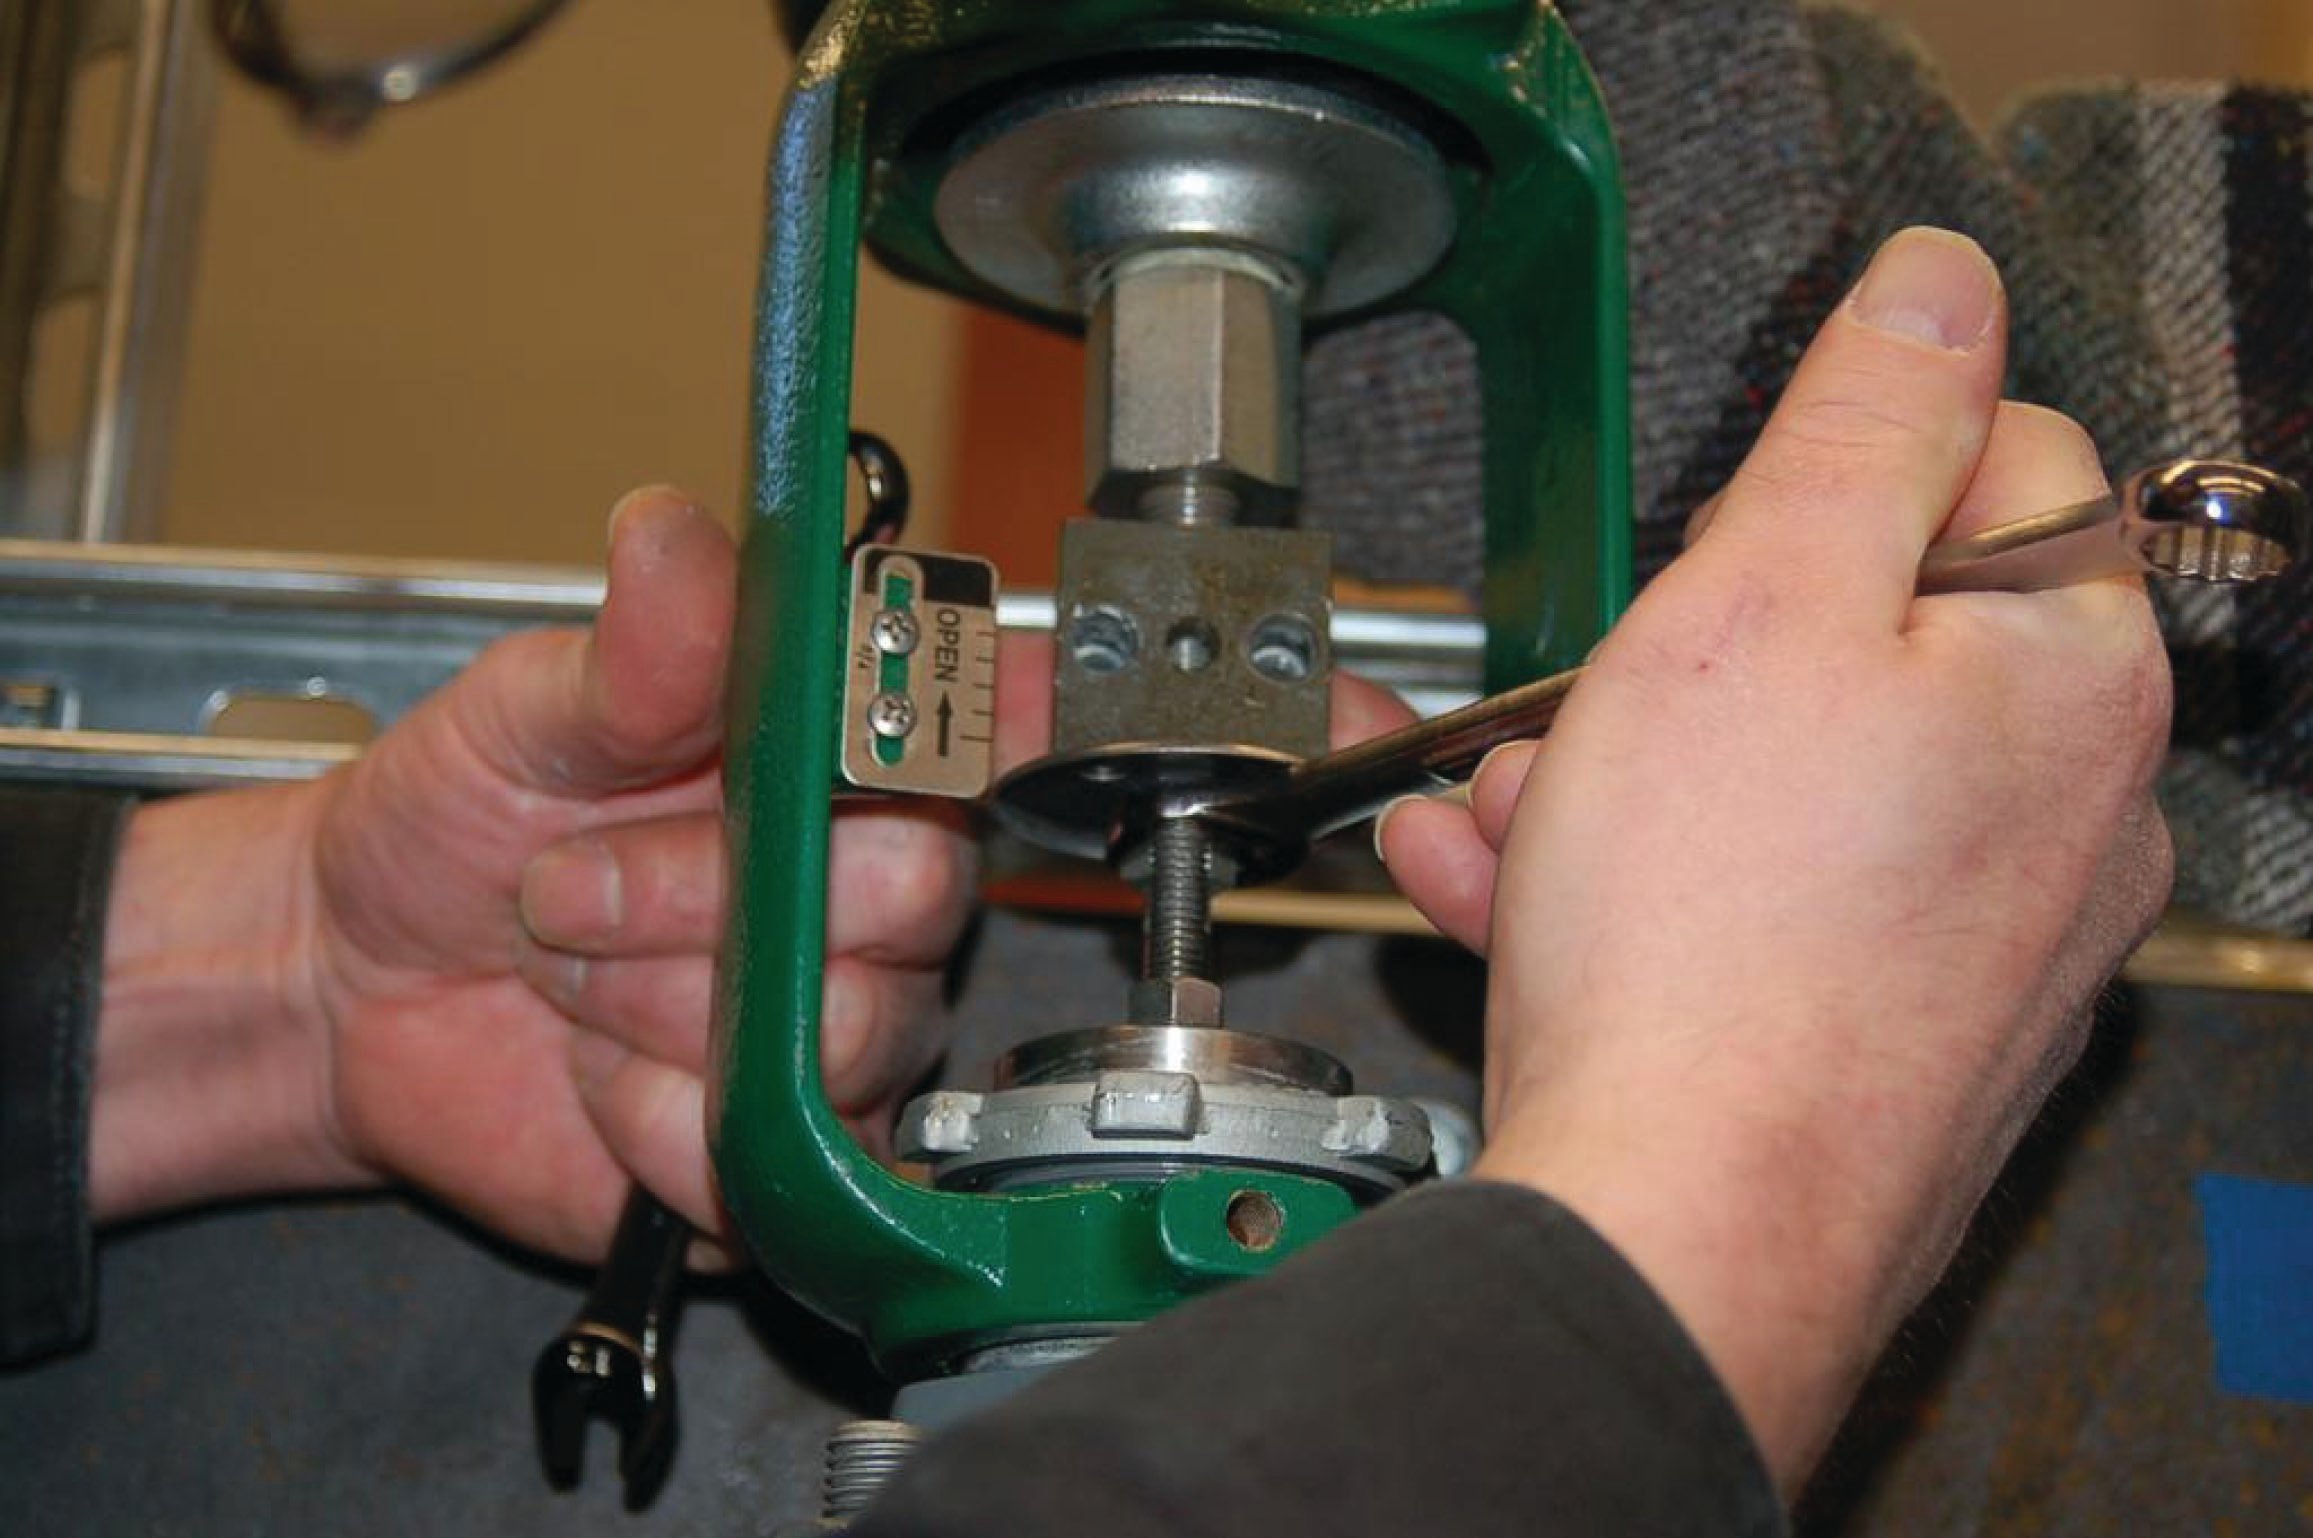 How to Disassemble a Sliding-stem Control Valve - Overview